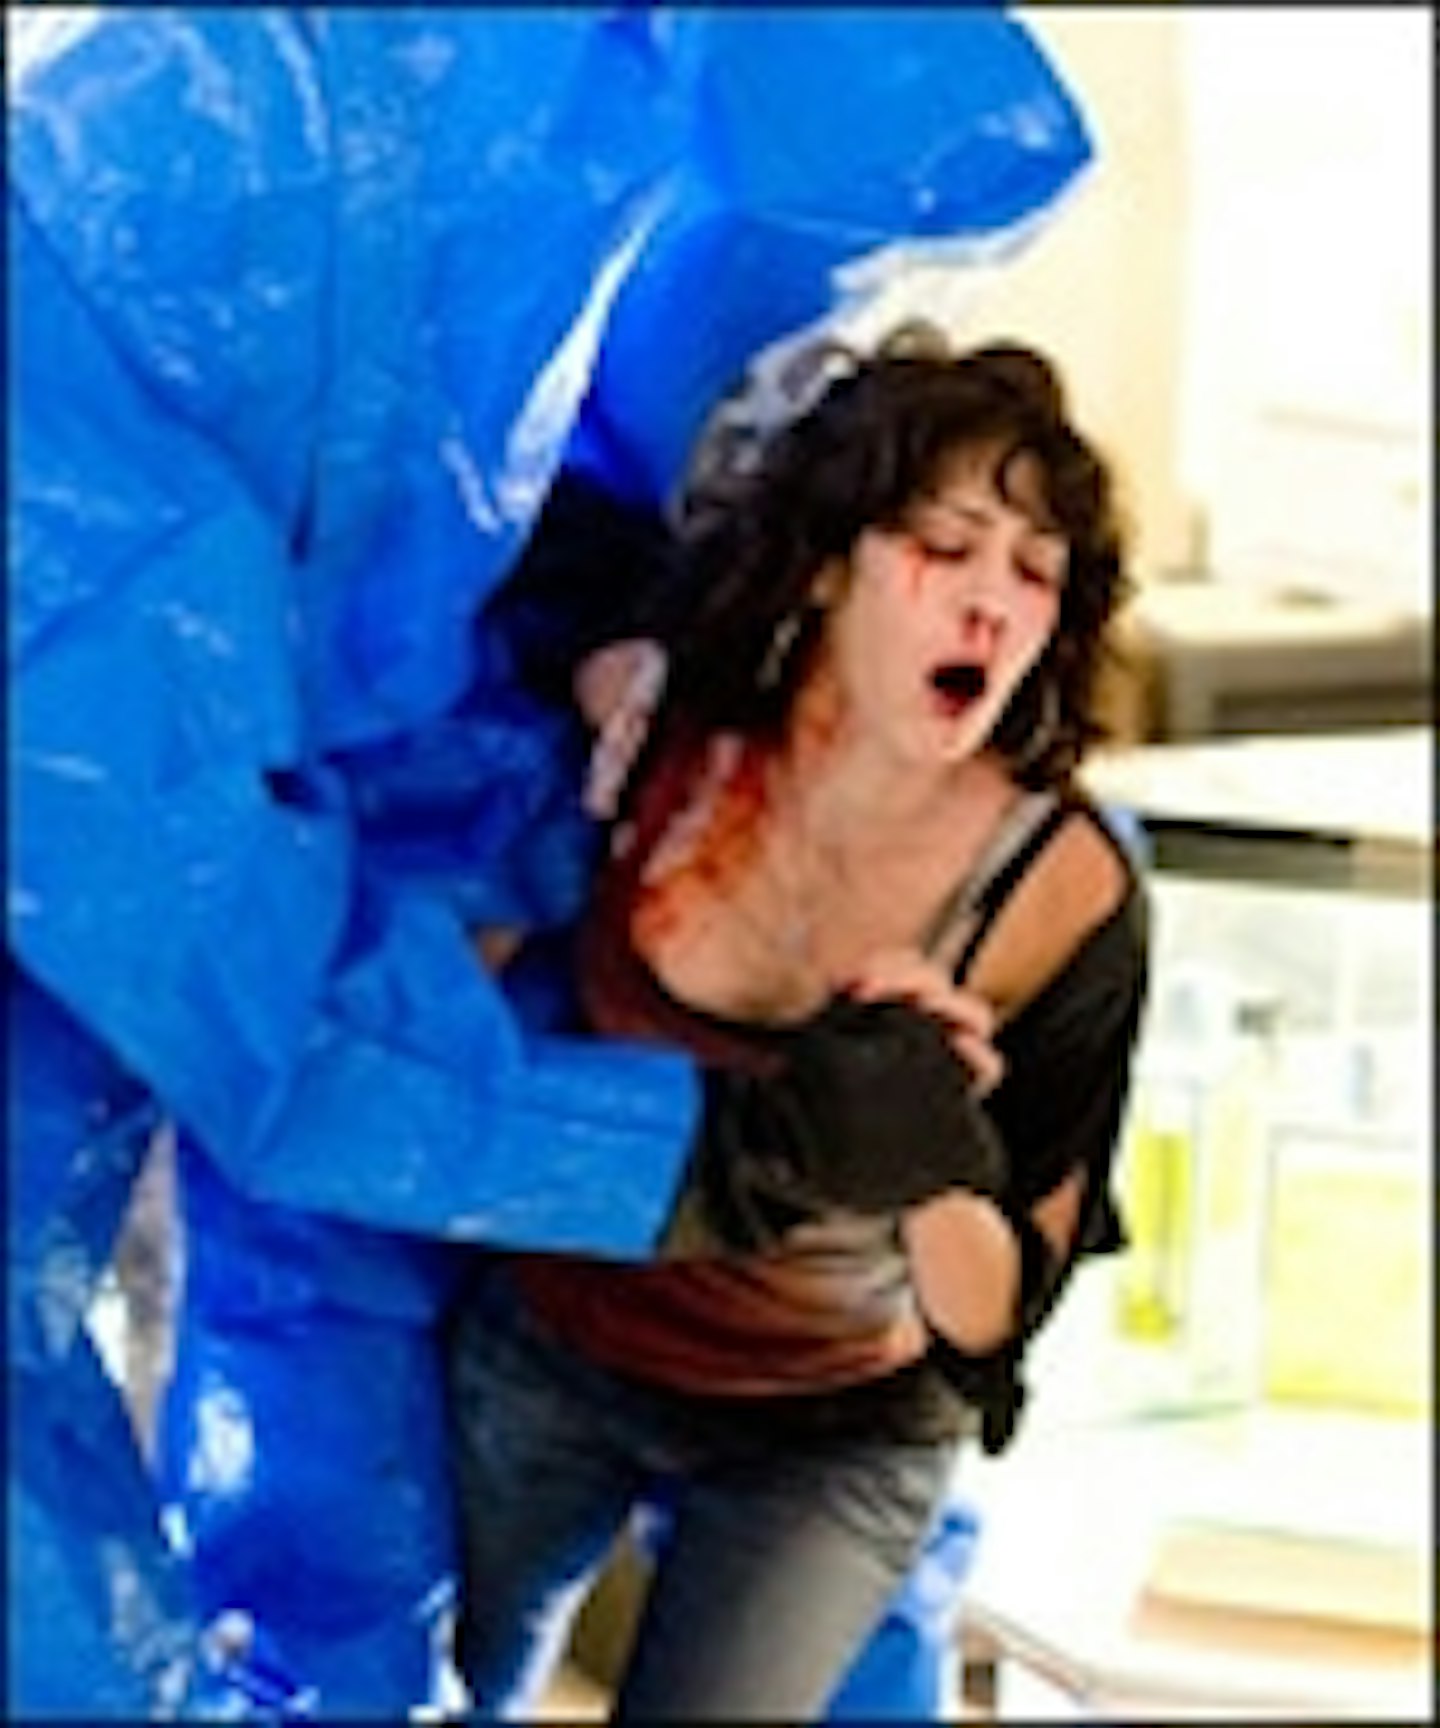 New Cloverfield Images Online